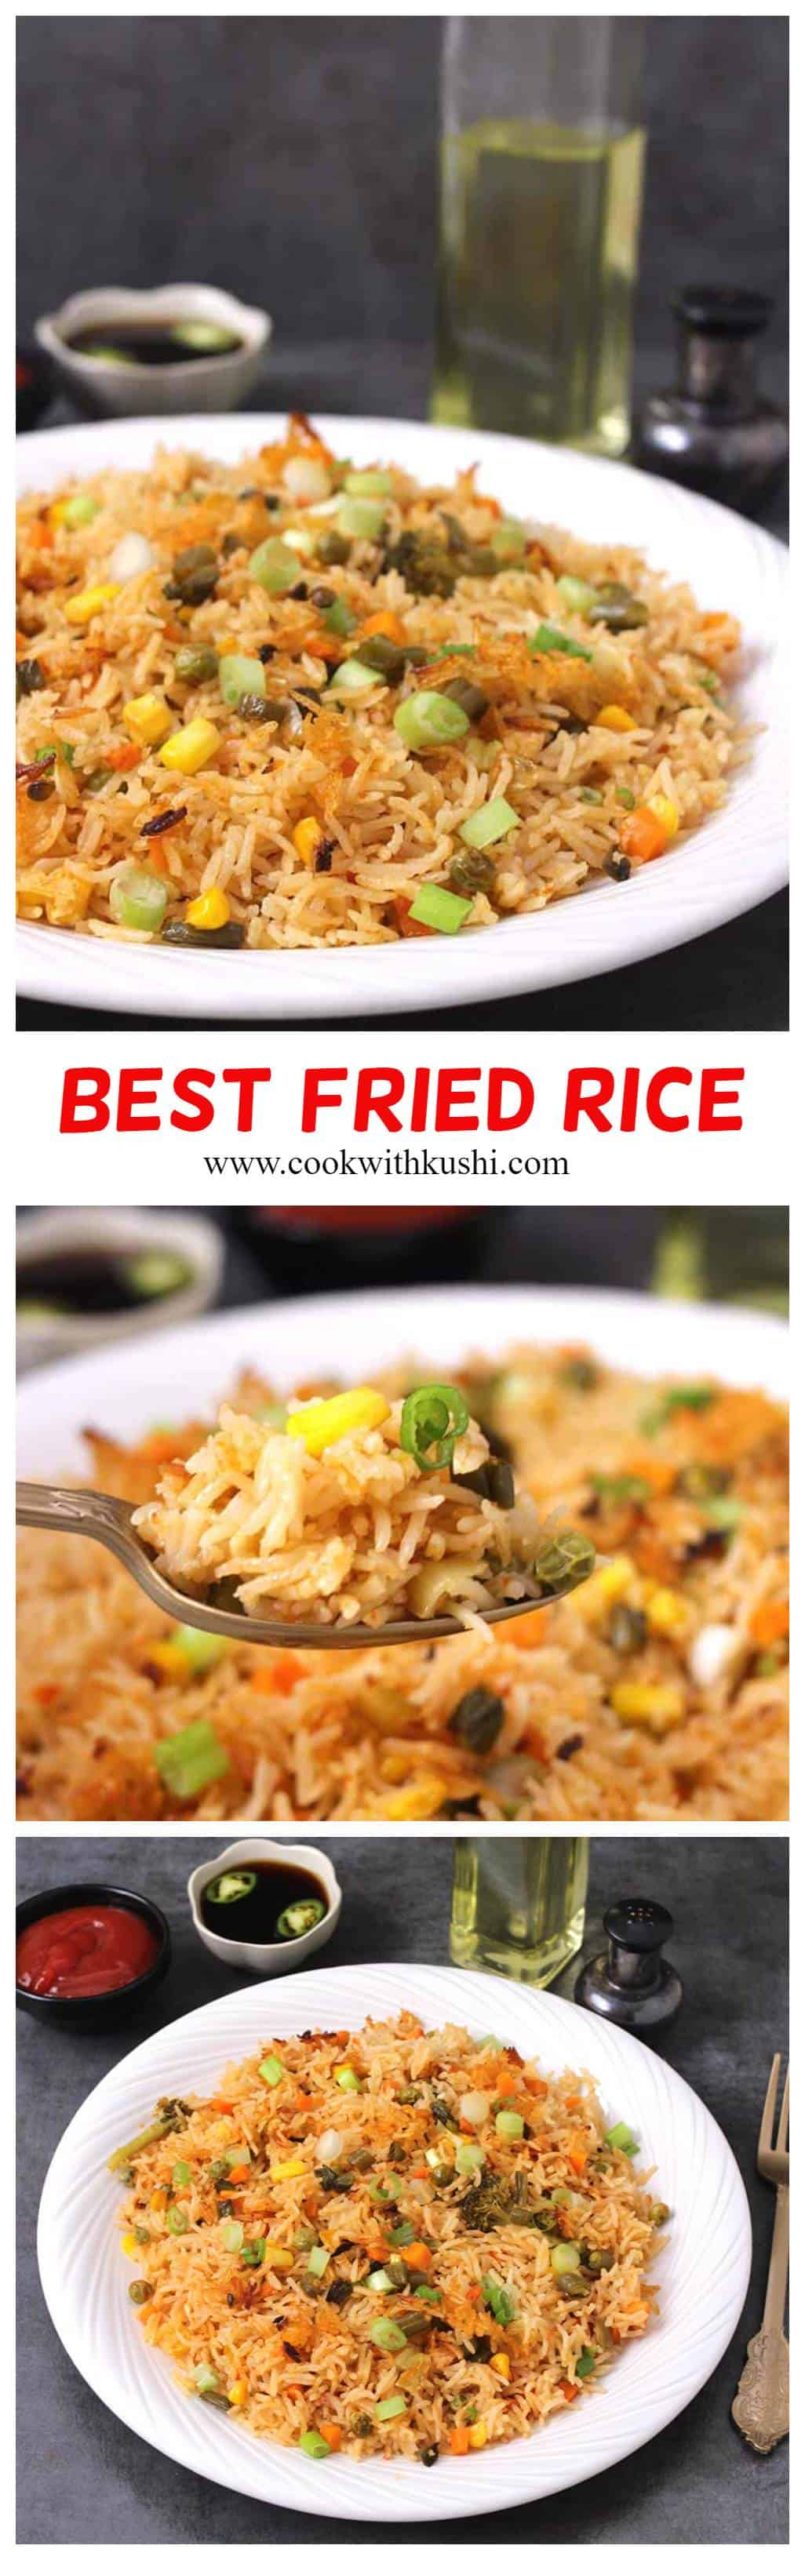 Baked Fried Rice is a super delicious and flavorful dish – with crispy and crunchy bits of rice and veggies making it taste like a perfect restaurant style food for your lunch or dinner. This rice recipe is vegan and gluten free. #ketofriedrice #veggiefriedrice #instantpotfriedrice #onepotmeals #onepotdinner #onepotrice #onepanmeals 